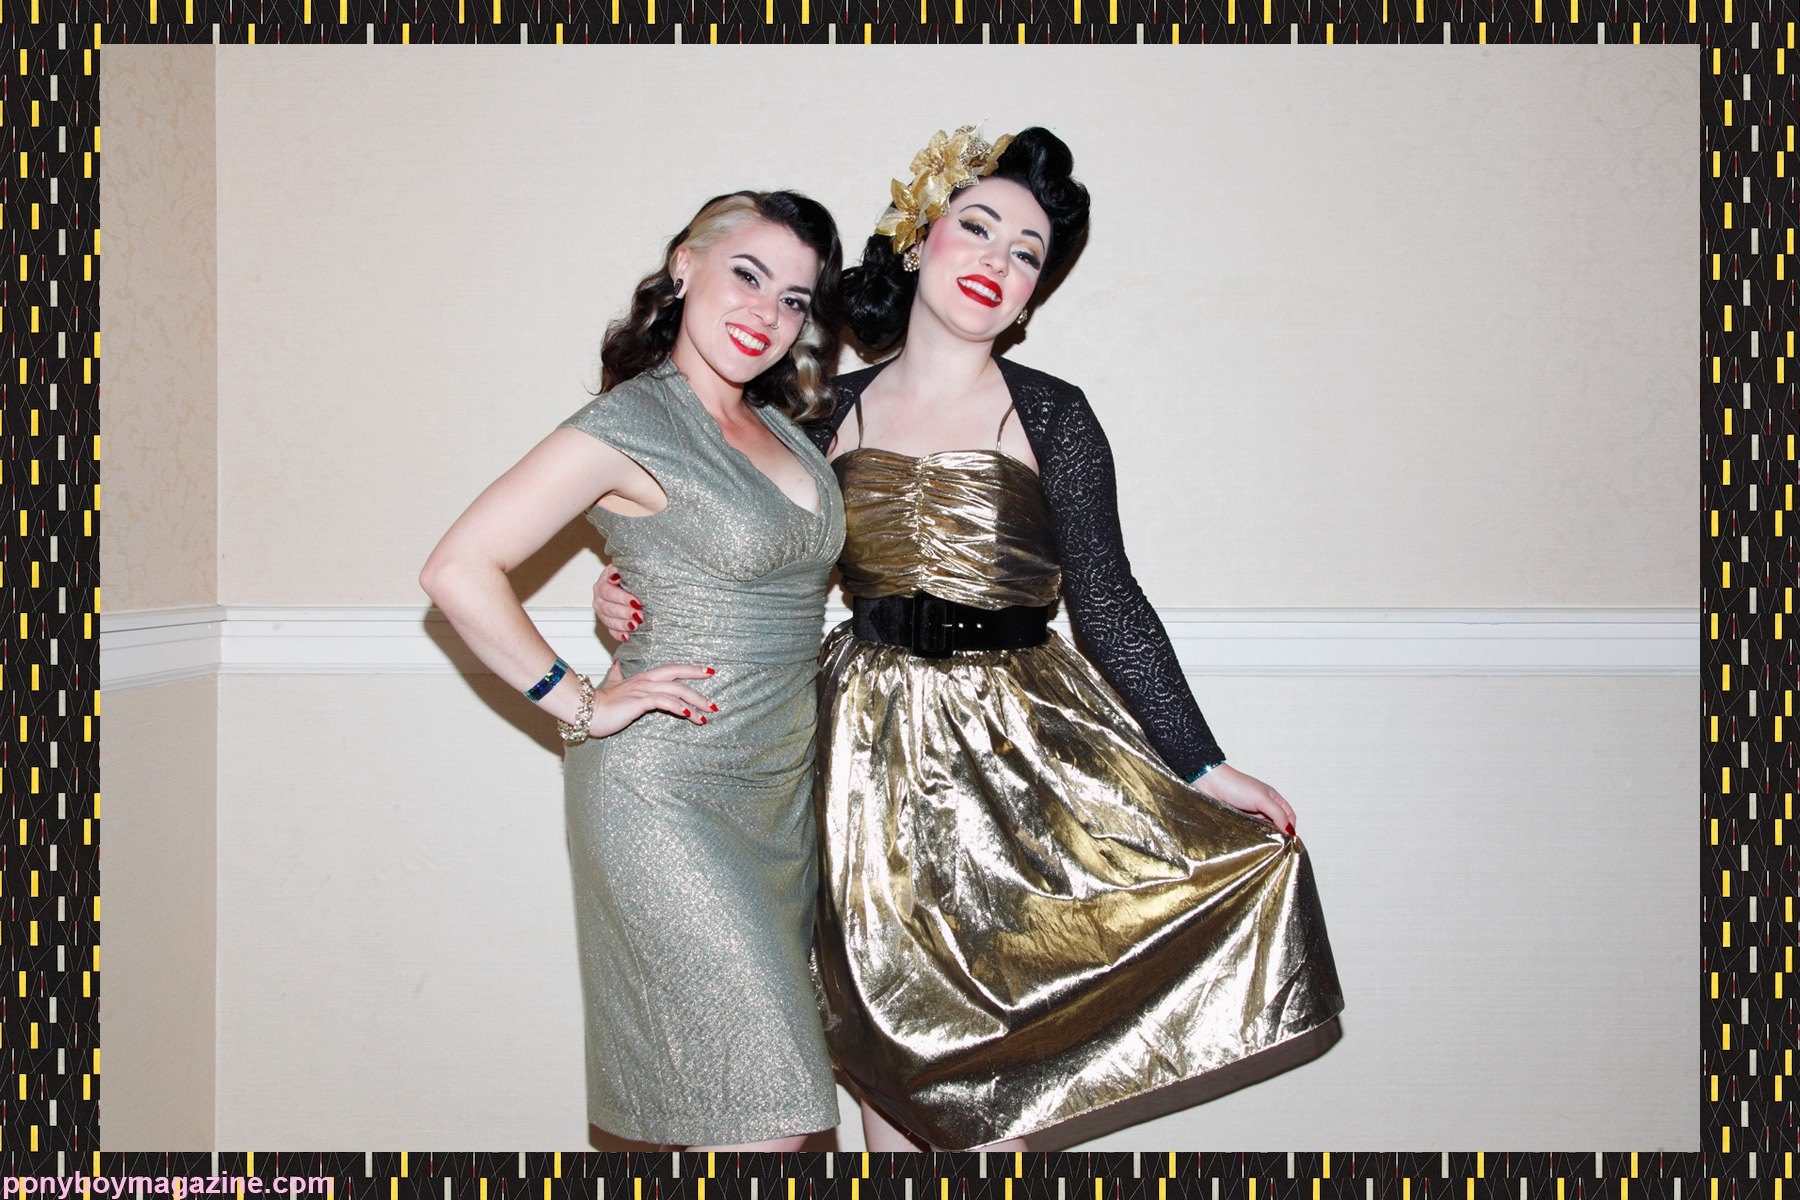 Rockabilly vintage ladies fashion at The New England Shake-Up, photographed by Alexander Thompson.